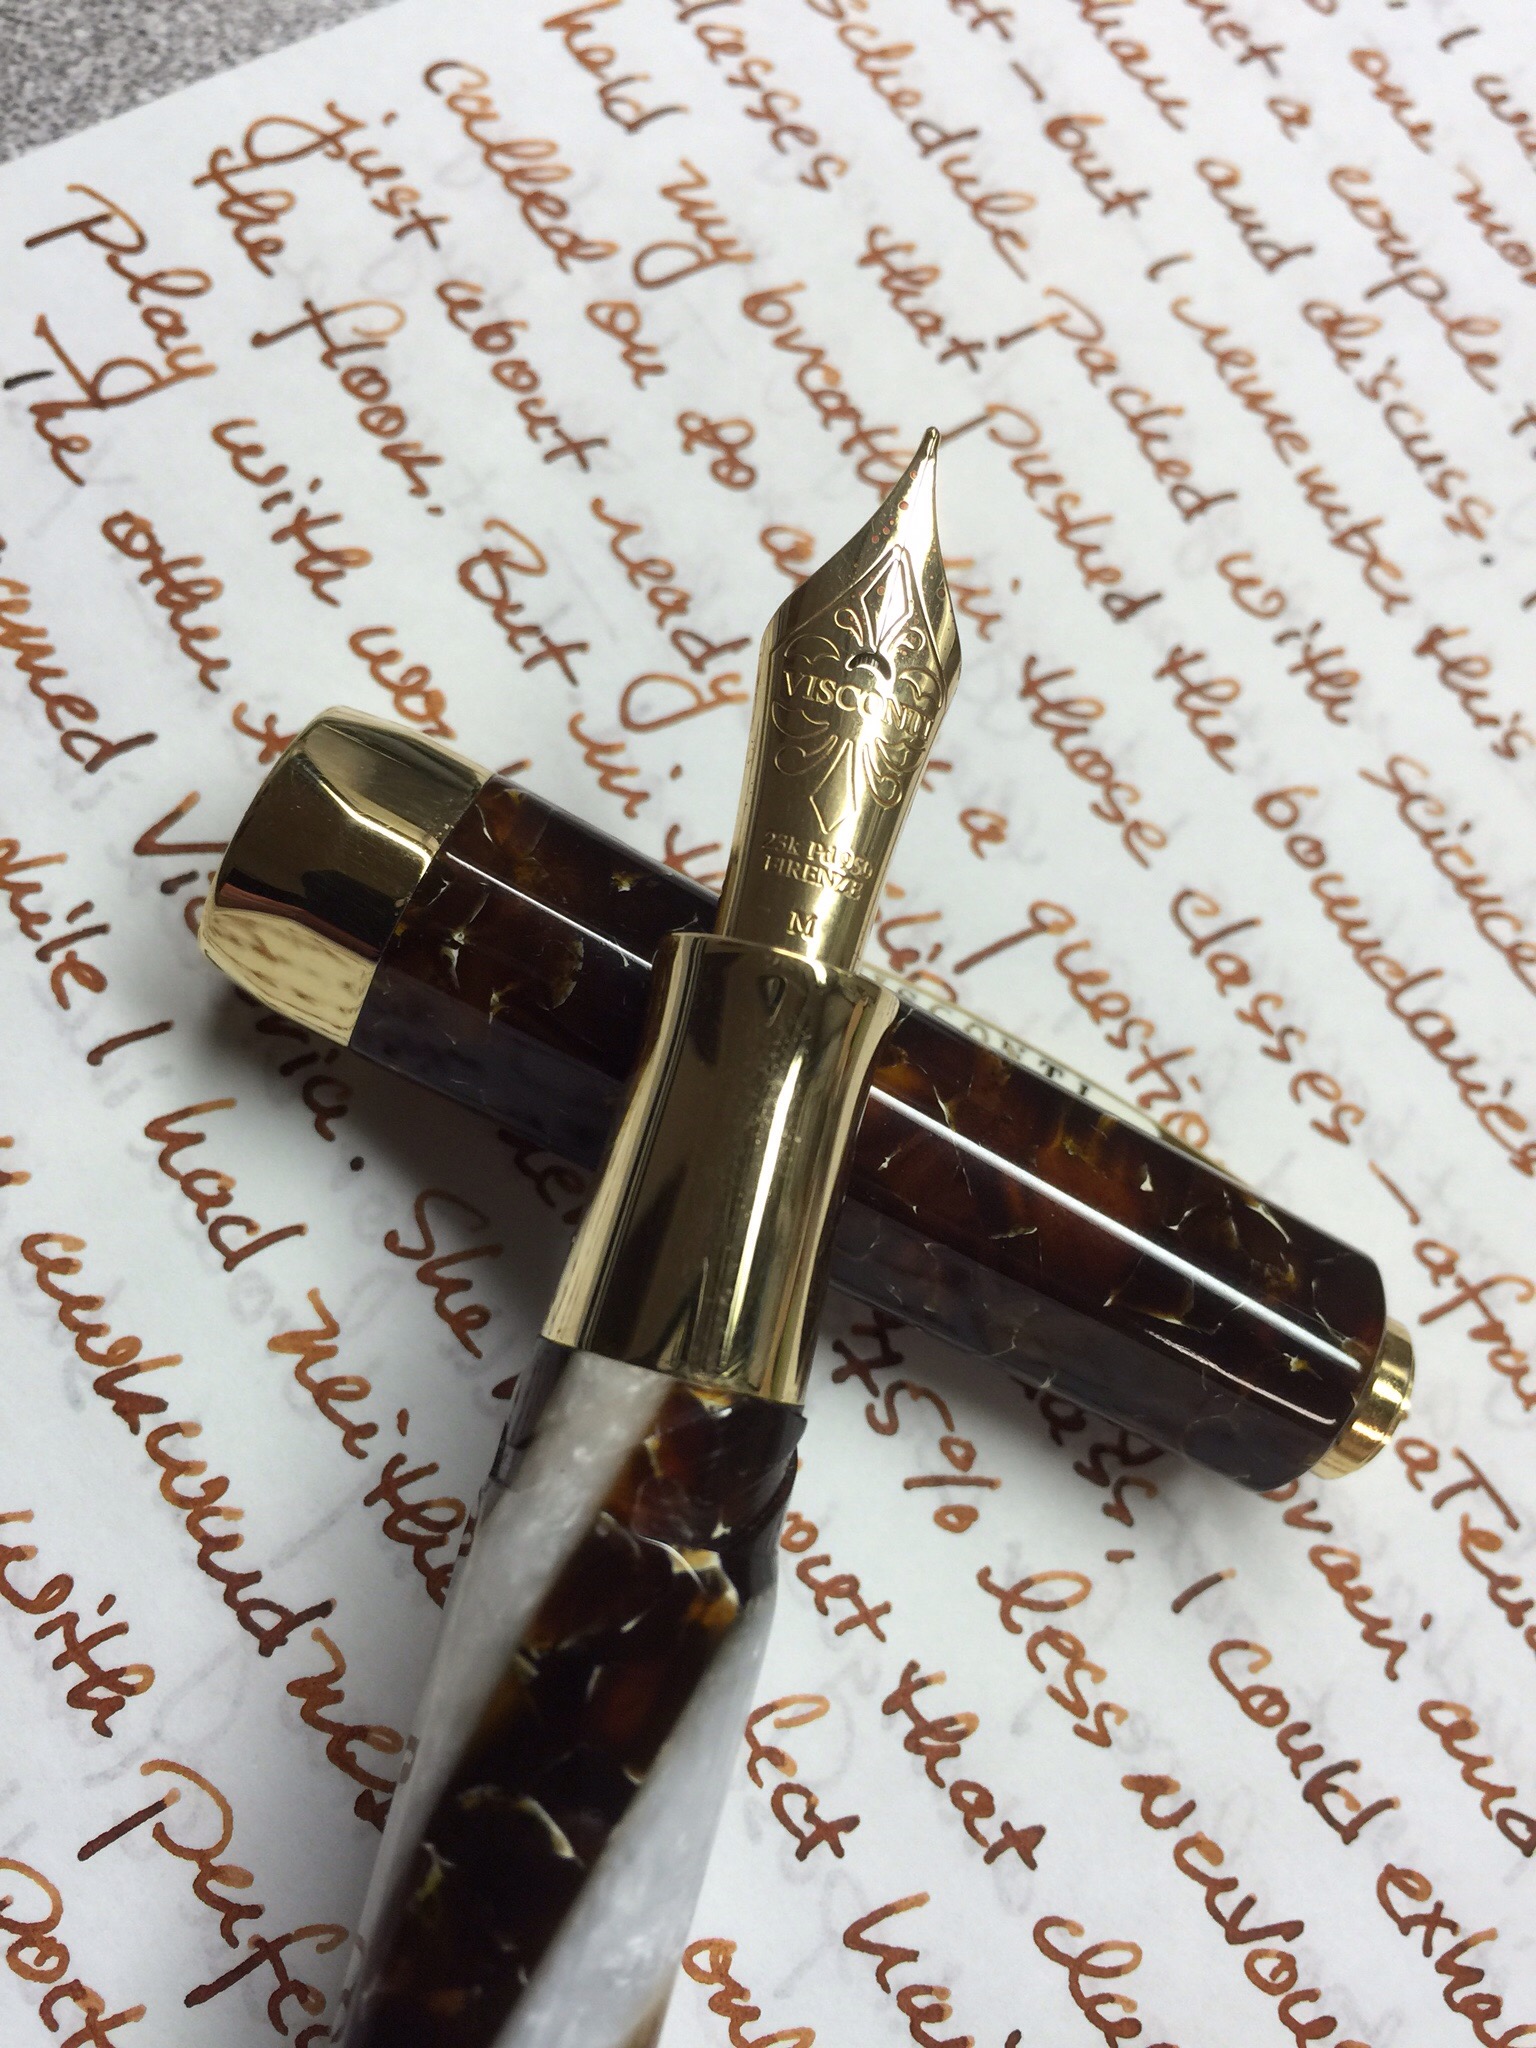 Perfect: SBRE Brown Ink | From the Pen Cup